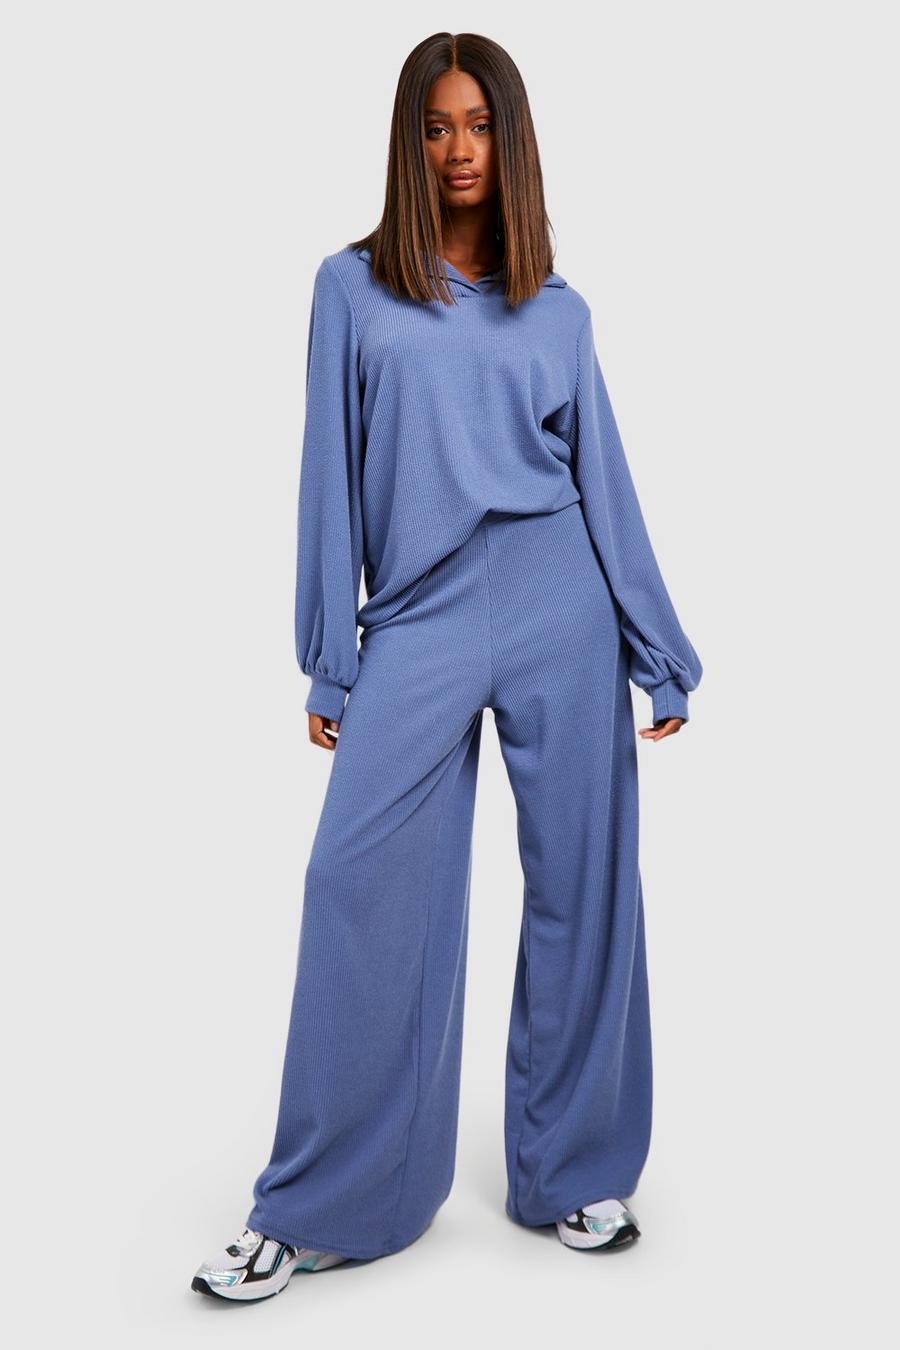 Slate blue Ribbed Slouchy Collard Top & Floaty Trousers